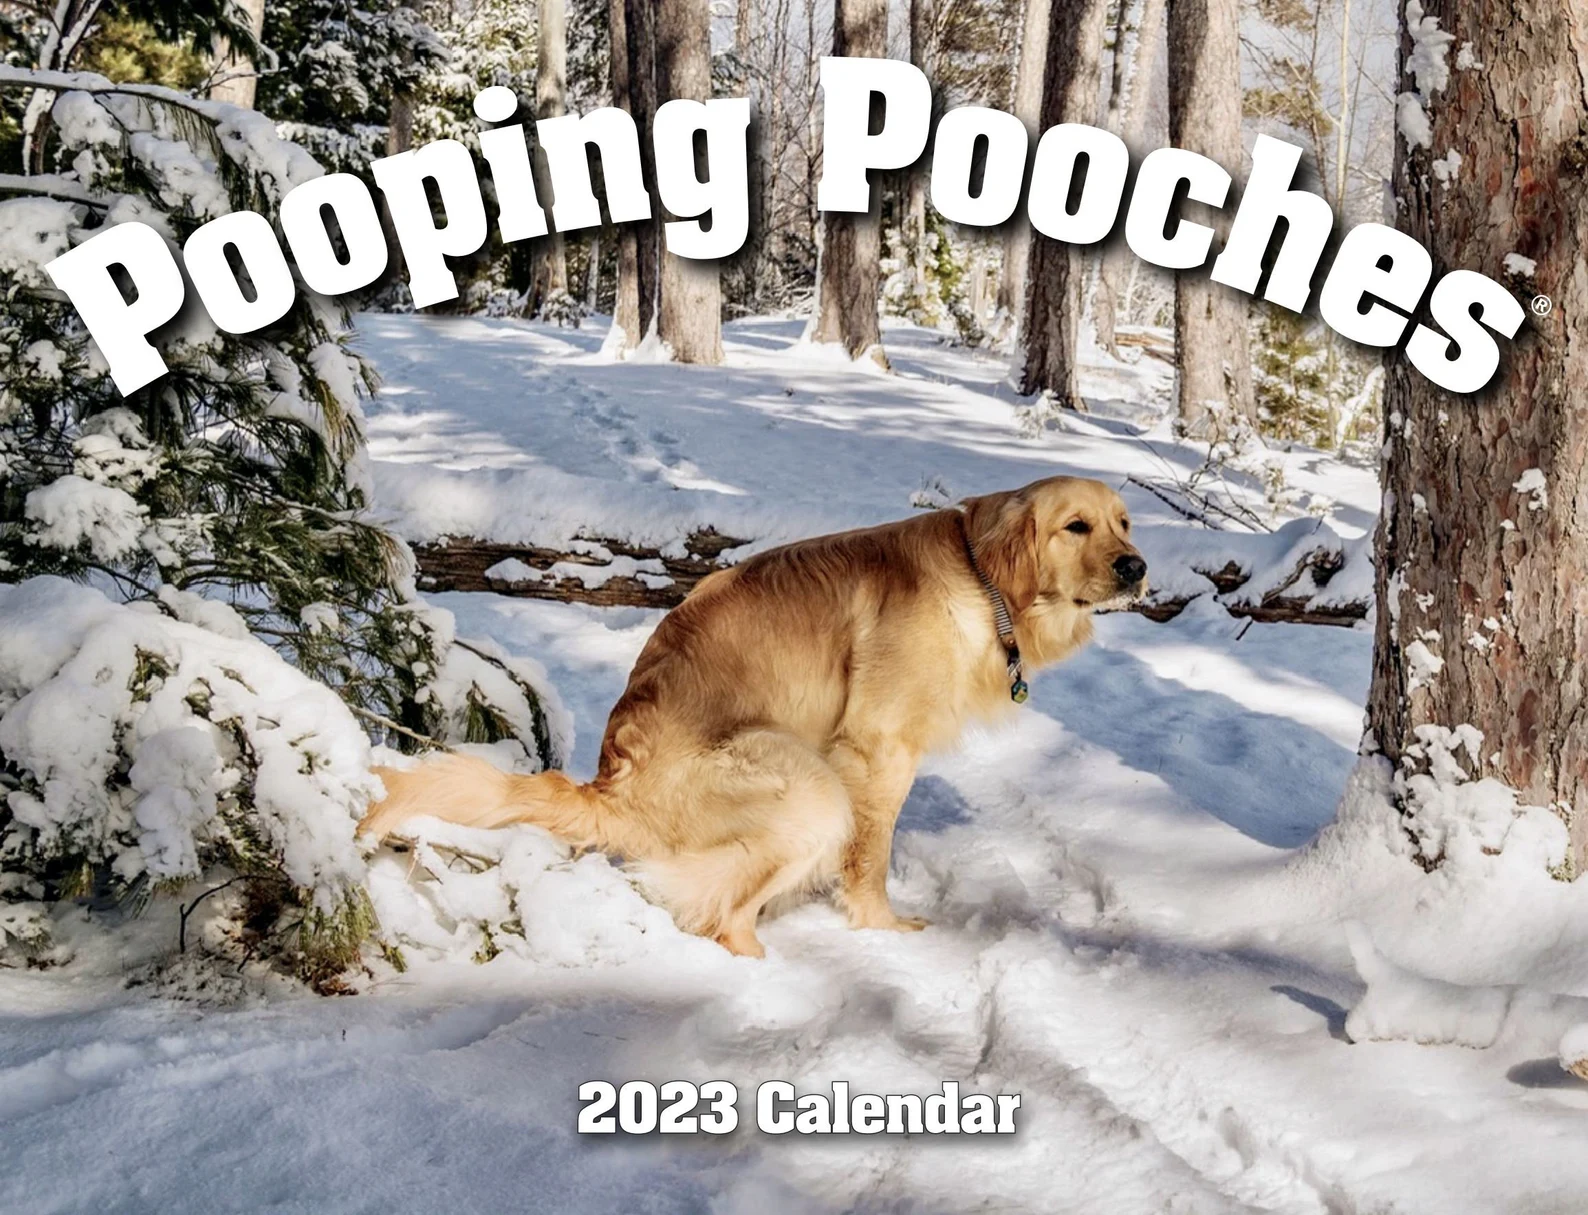 pooping pooches calendar etsy